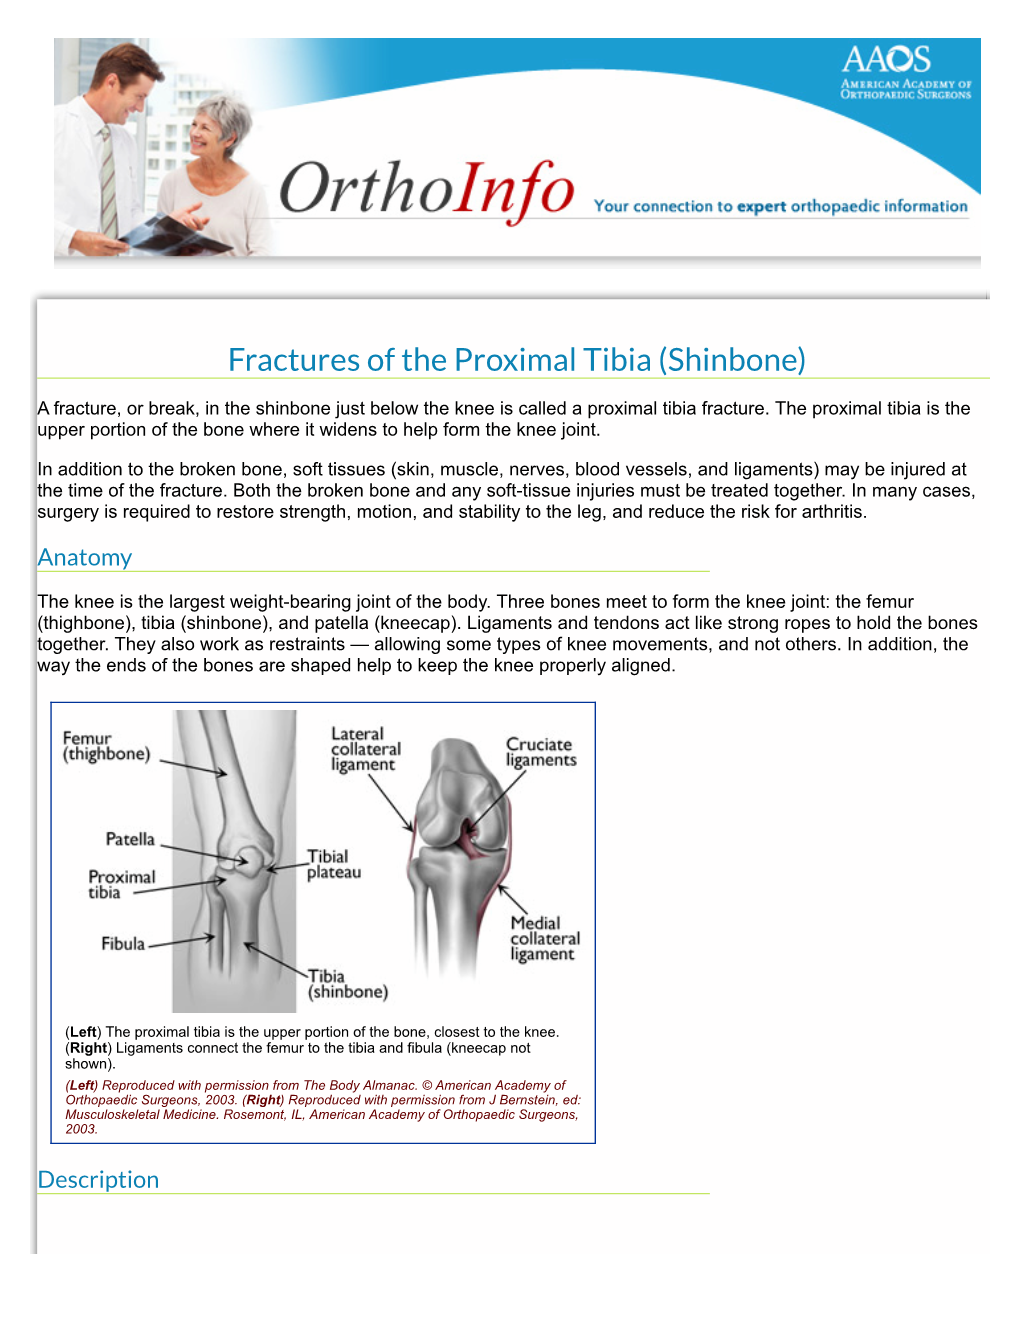 Fractures of the Proximal Tibia (Shinbone)